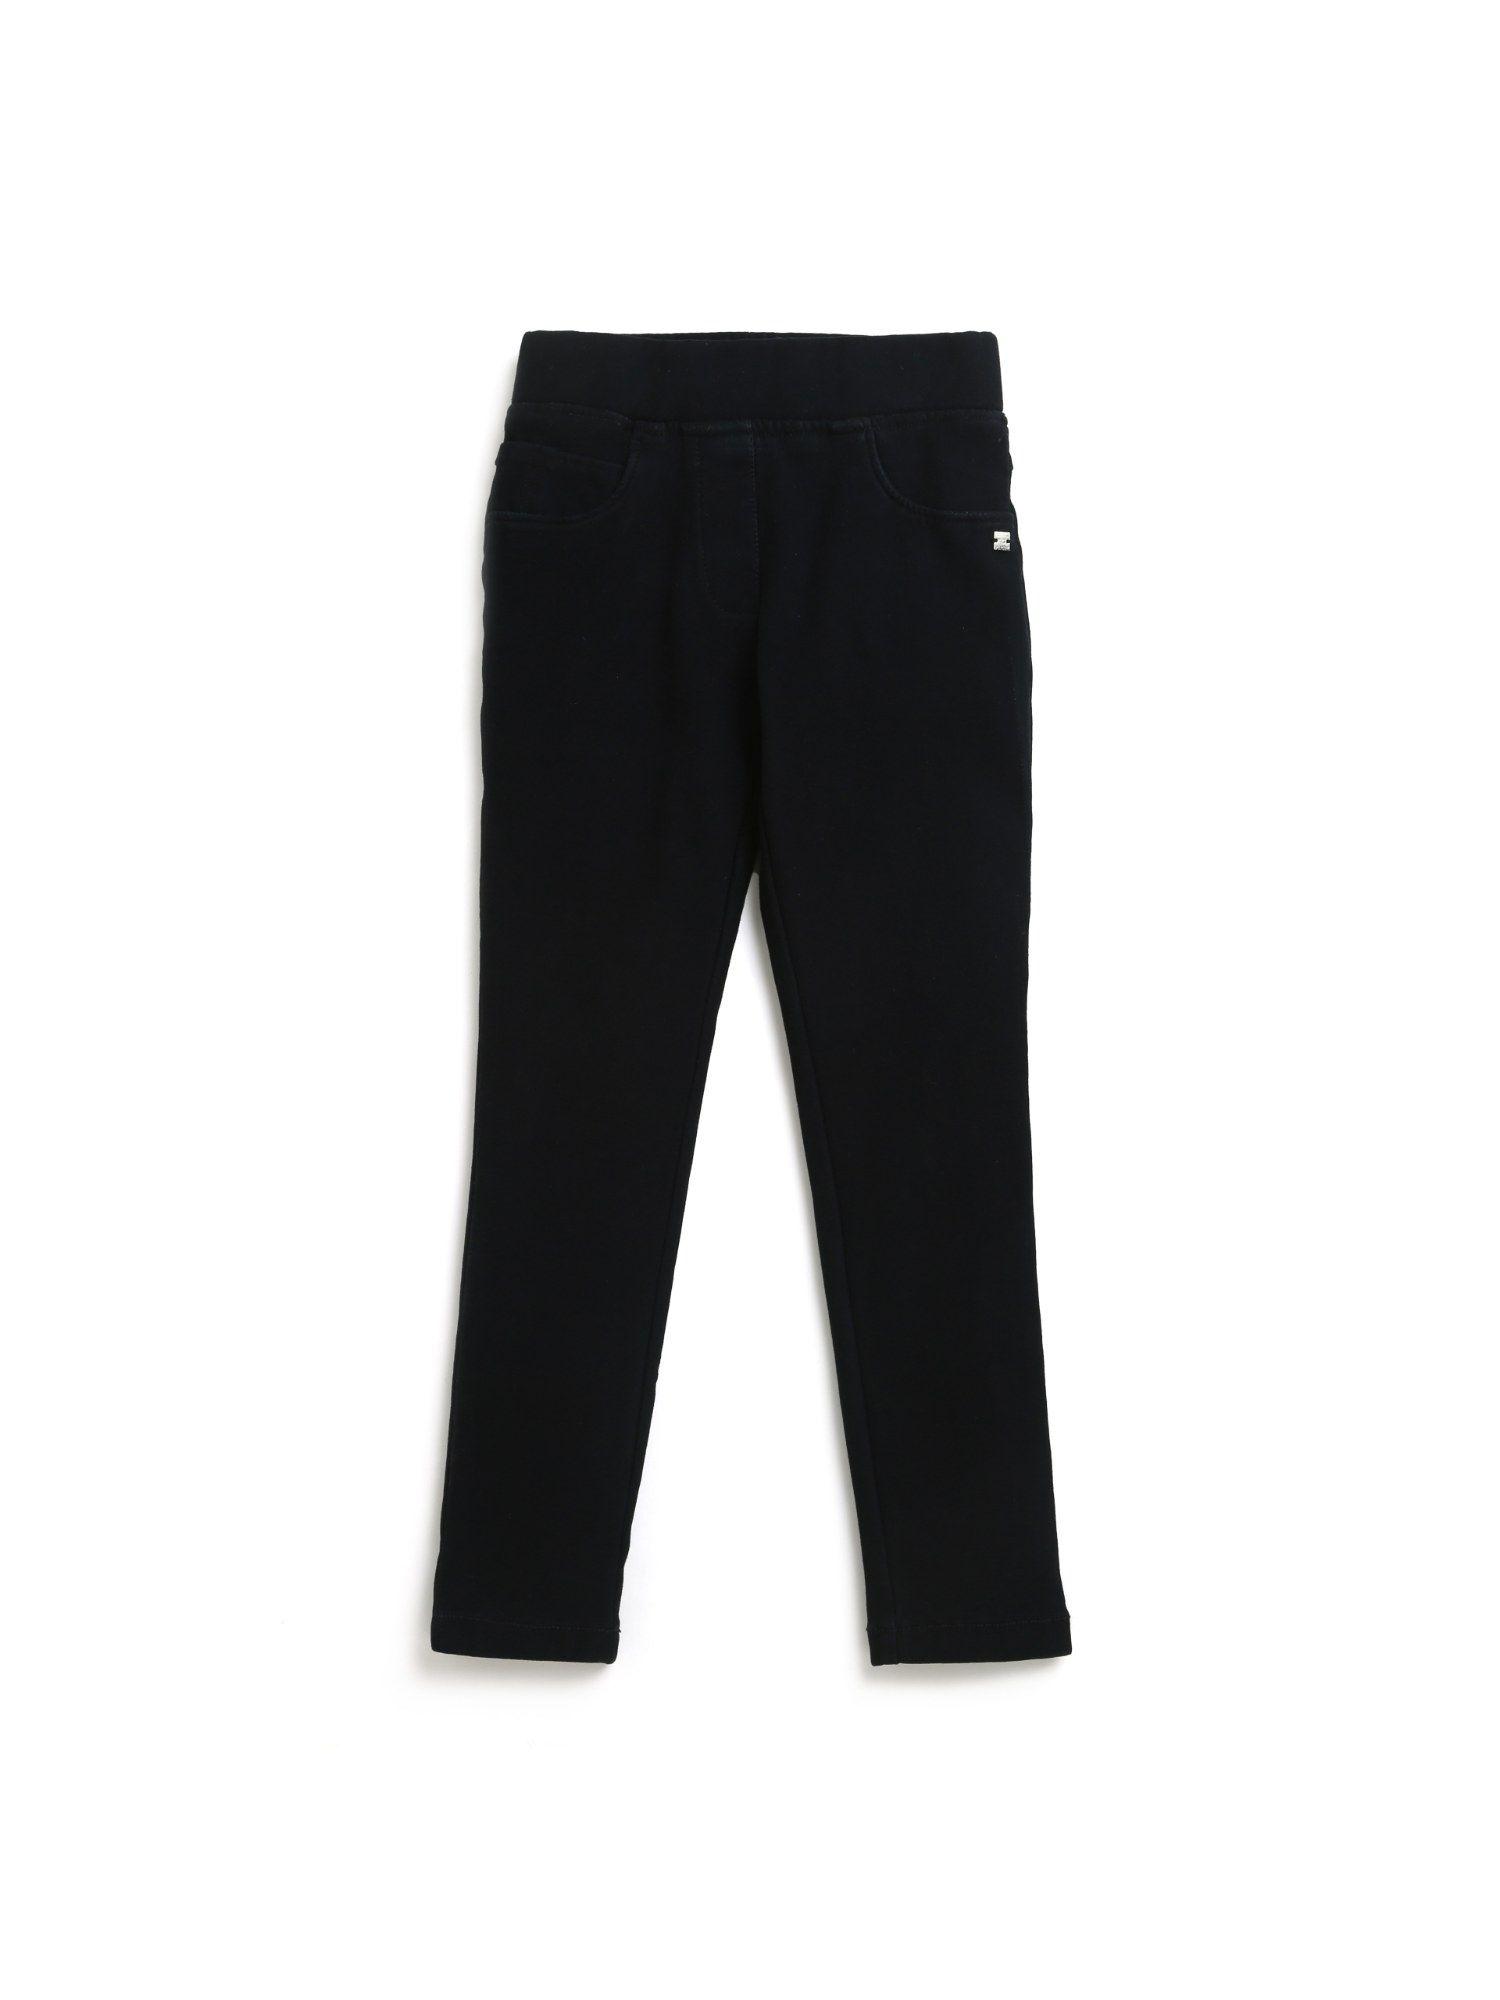 black knitted cotton solid jeggings